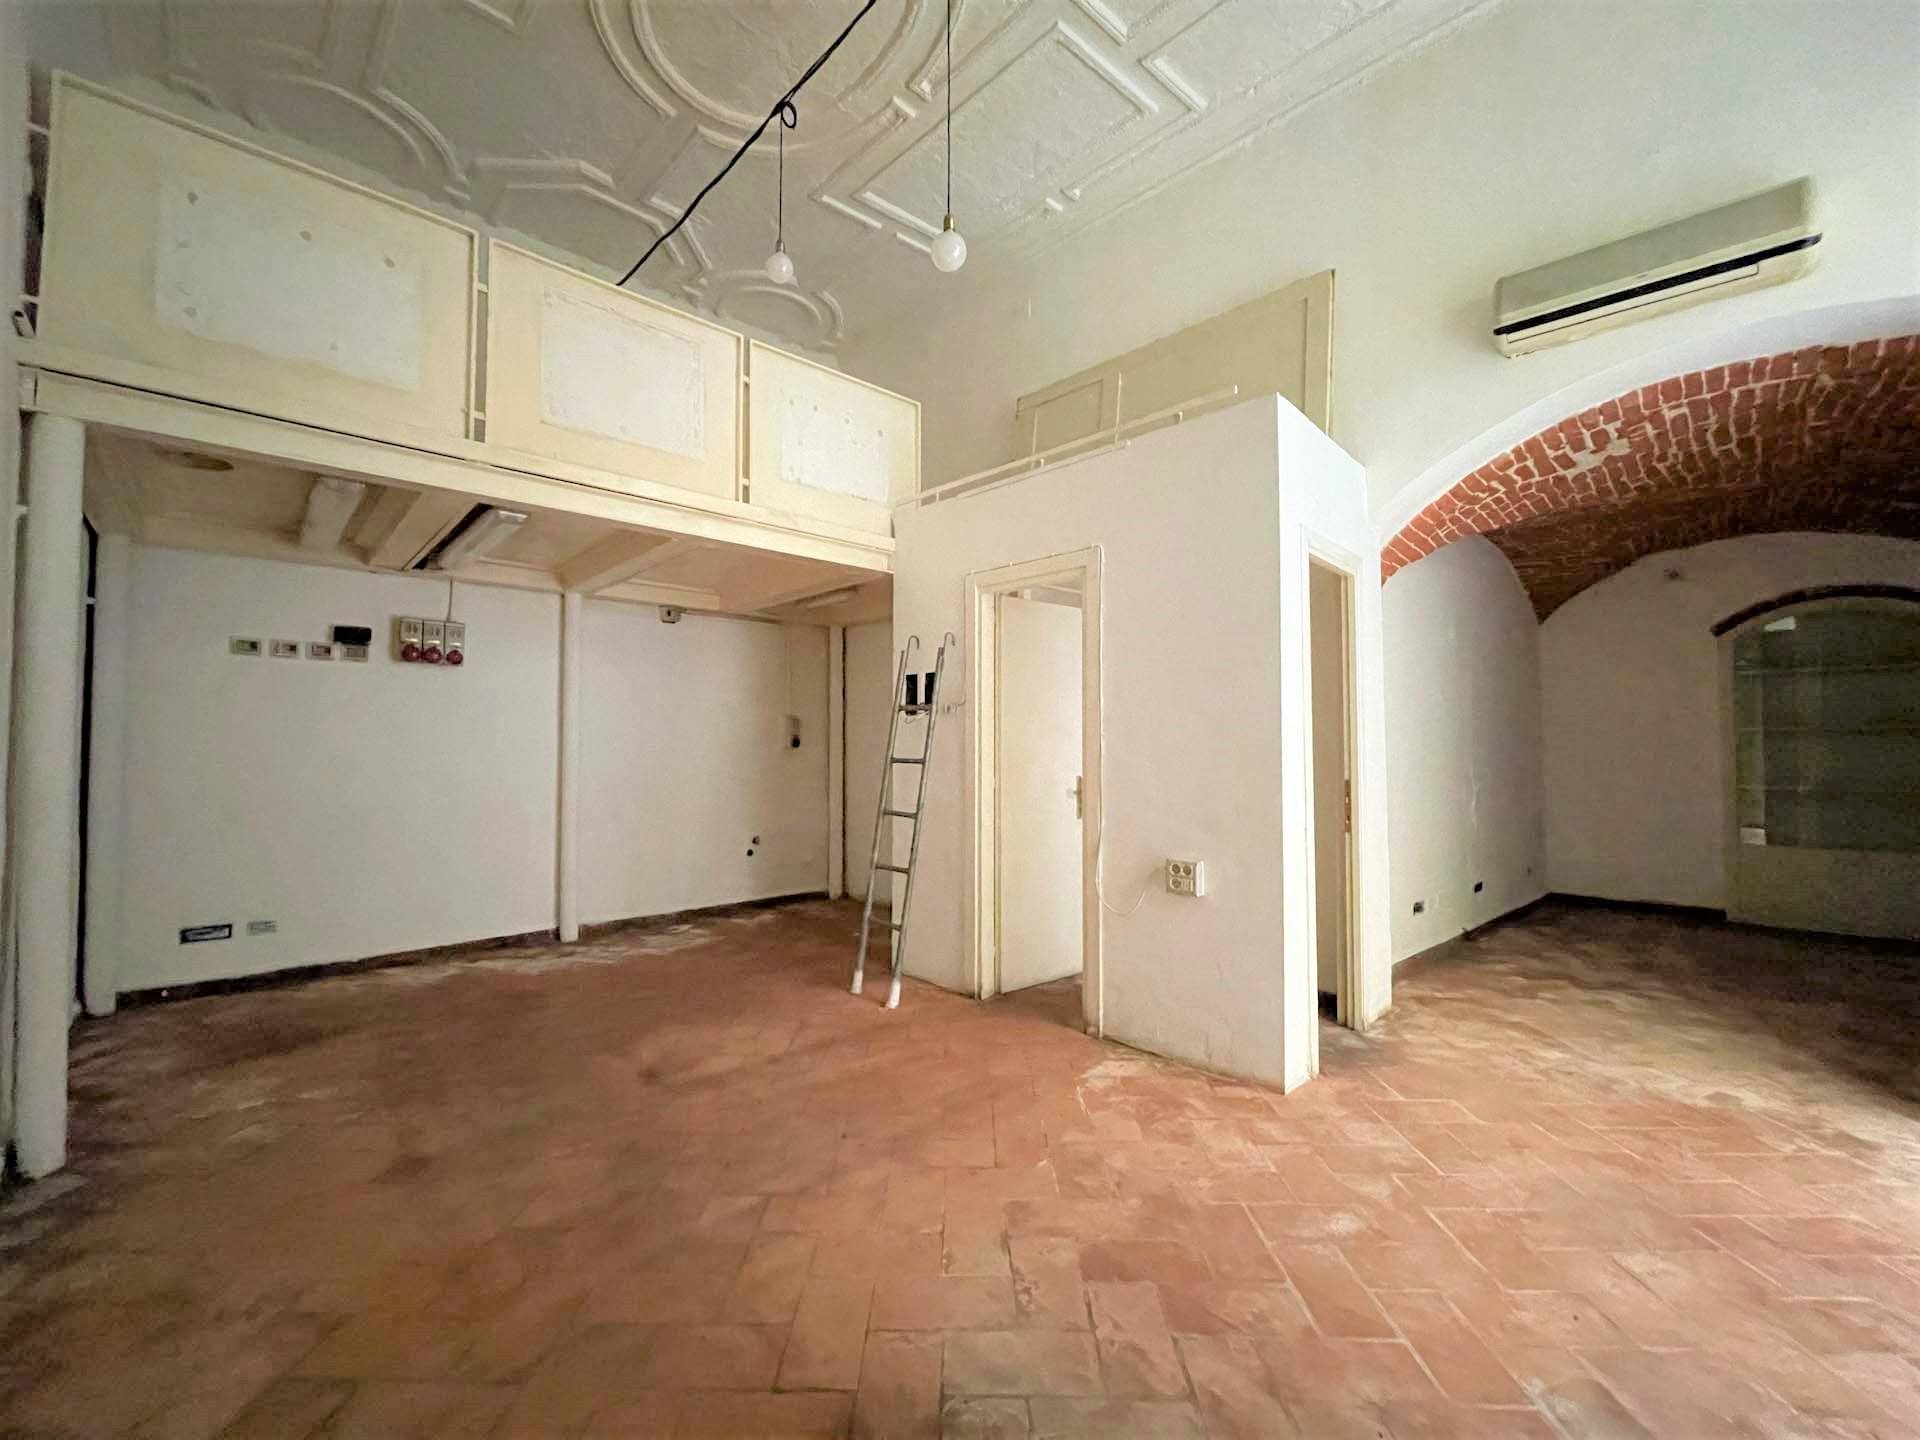 CENTRO - CONTRADA LEOCORNO, SIENA, Workshop for sale of 50 Sq. mt., Good condition, Heating Individual heating system, Energetic class: F, Epi: 13,1 kwh/m3 year, placed at Ground on 3, composed by: 2 